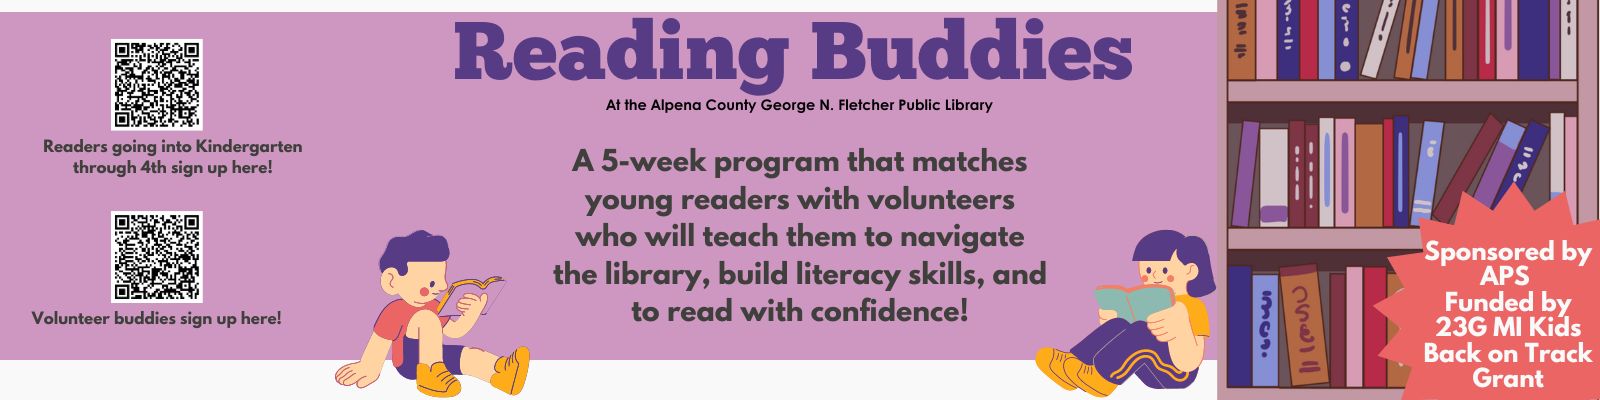 Reading Buddies feature graphic